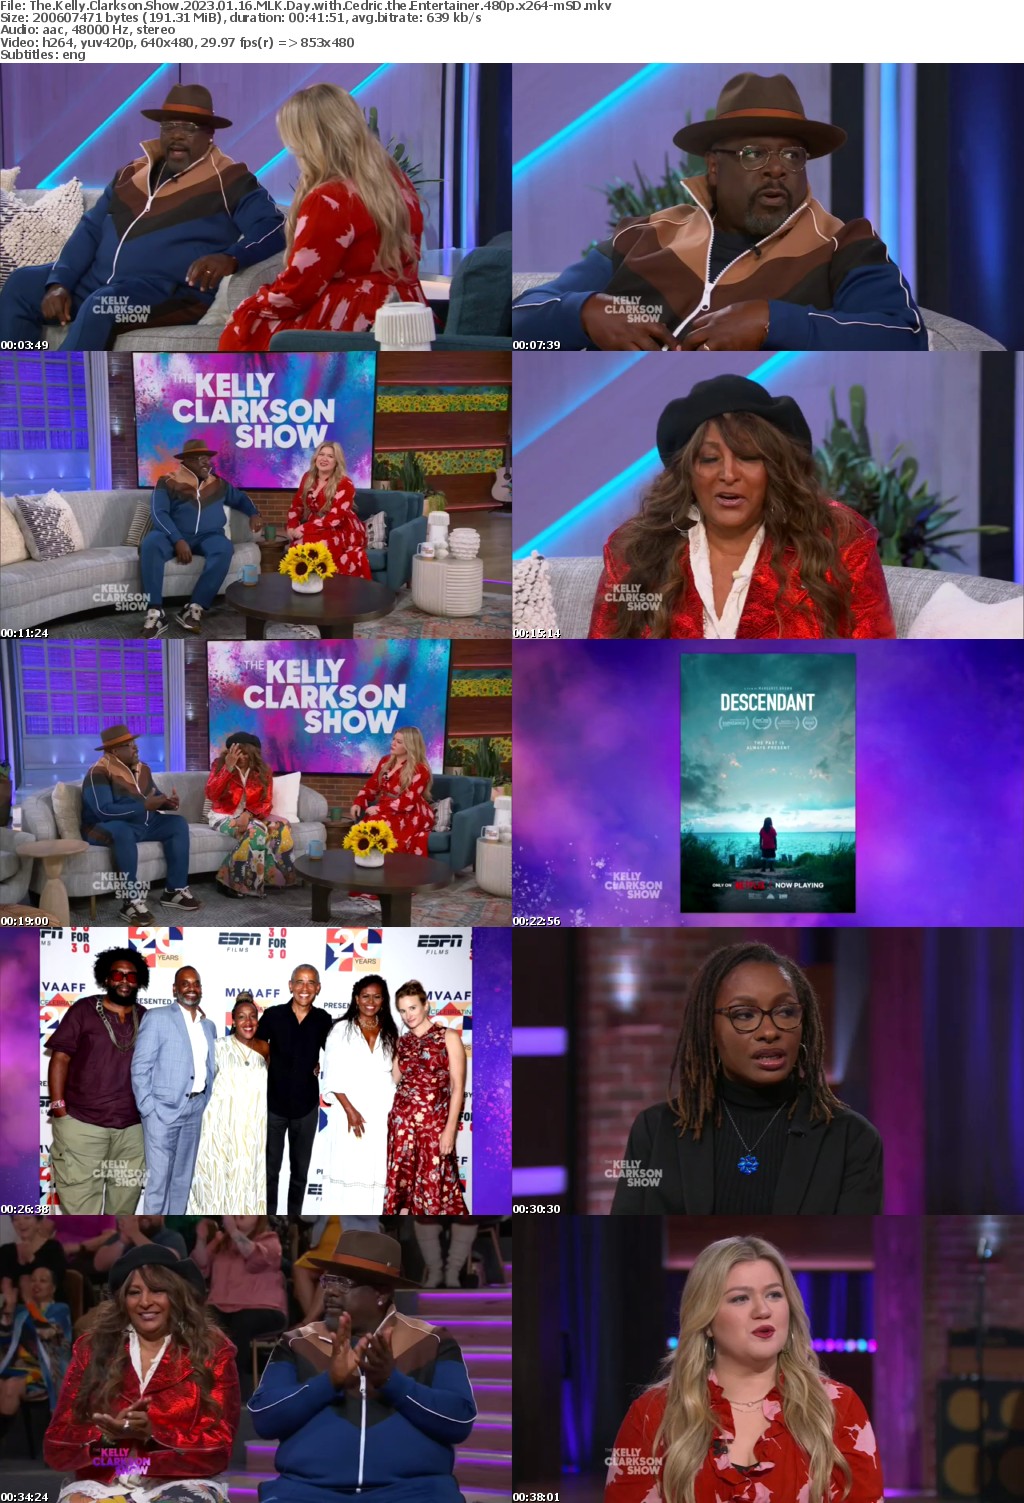 The Kelly Clarkson Show 2023 01 16 MLK Day with Cedric the Entertainer 480p x264-mSD